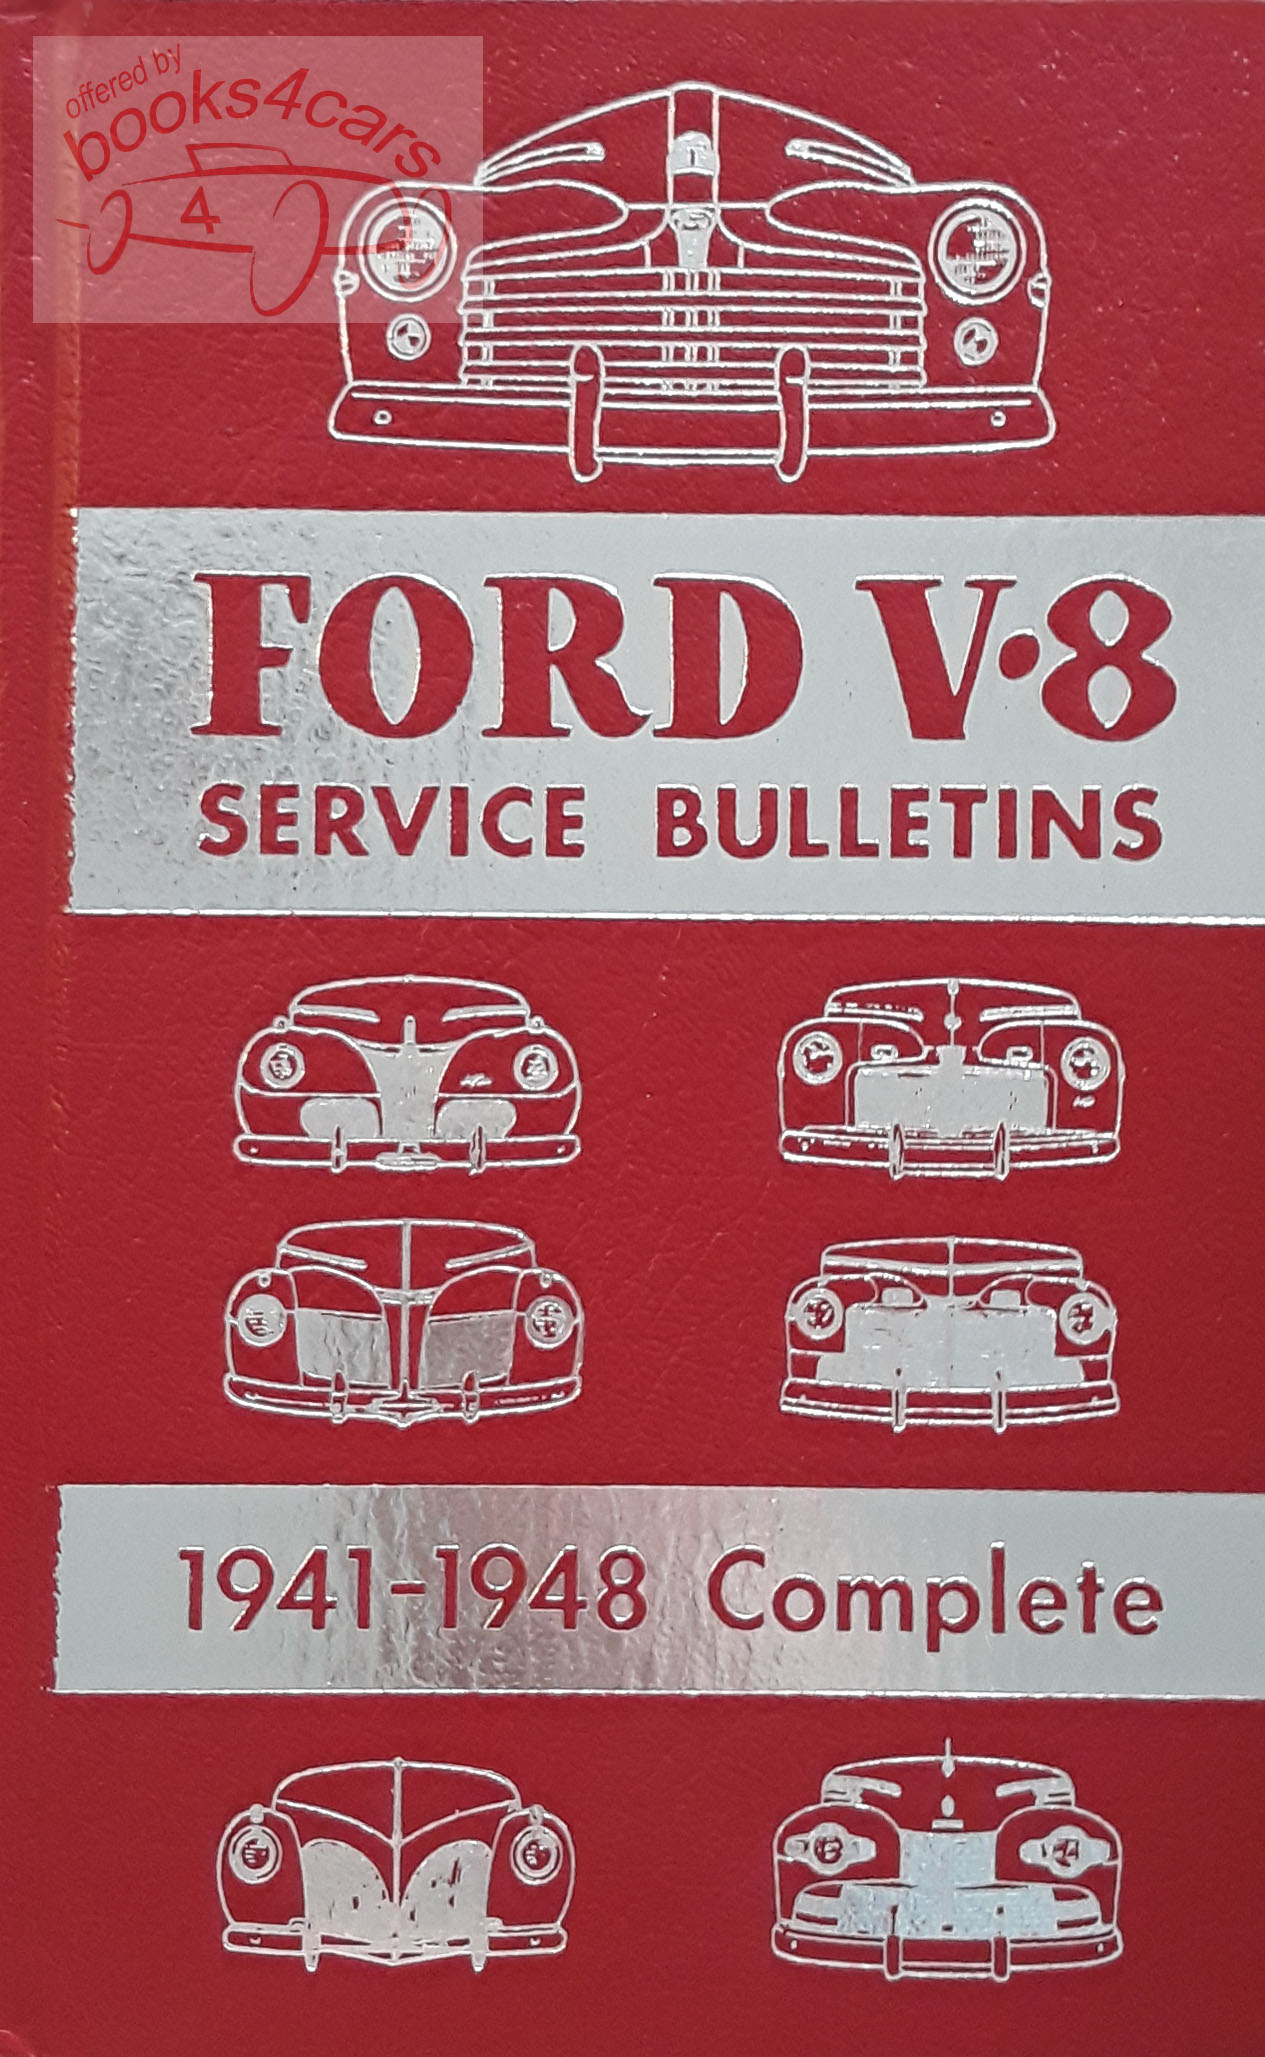 41-48 Service Bulletins by Ford Lincoln & Mercury 384 pages covers all models Ford Lincoln Mercury & Truck